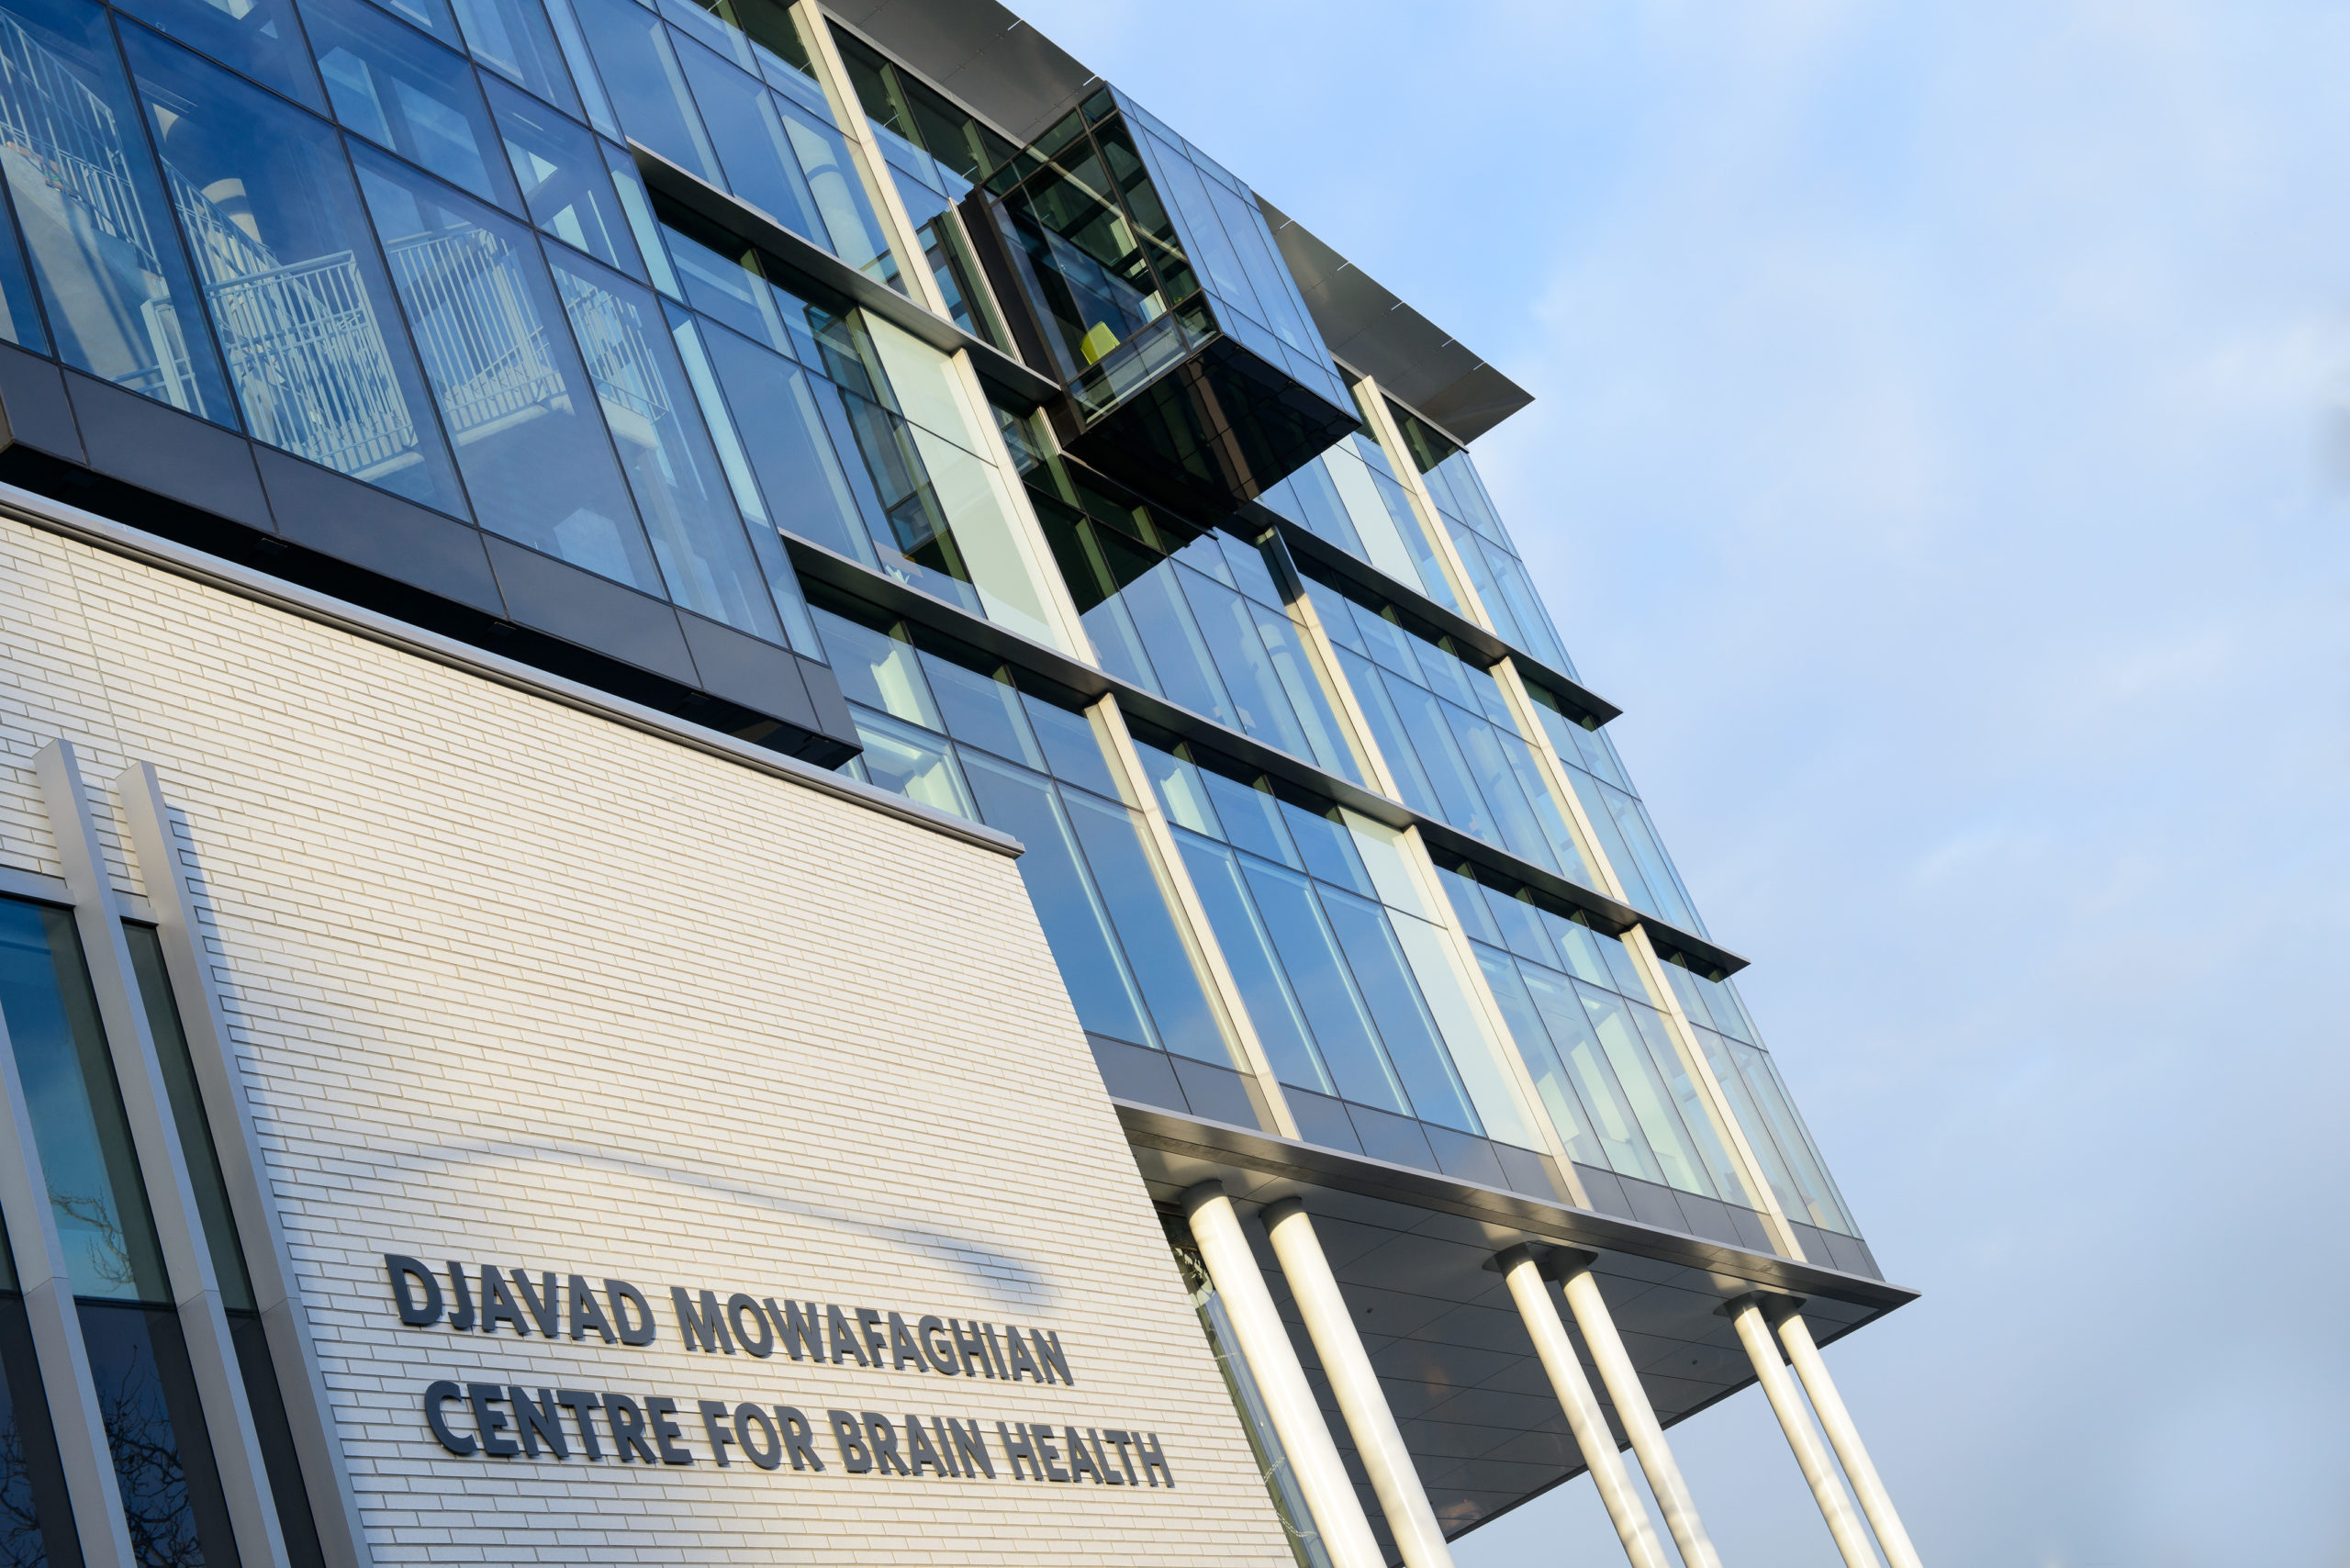 The exterior of the Djavad Mowafaghian Centre for Brain Health located at UBC's Vancouver campus